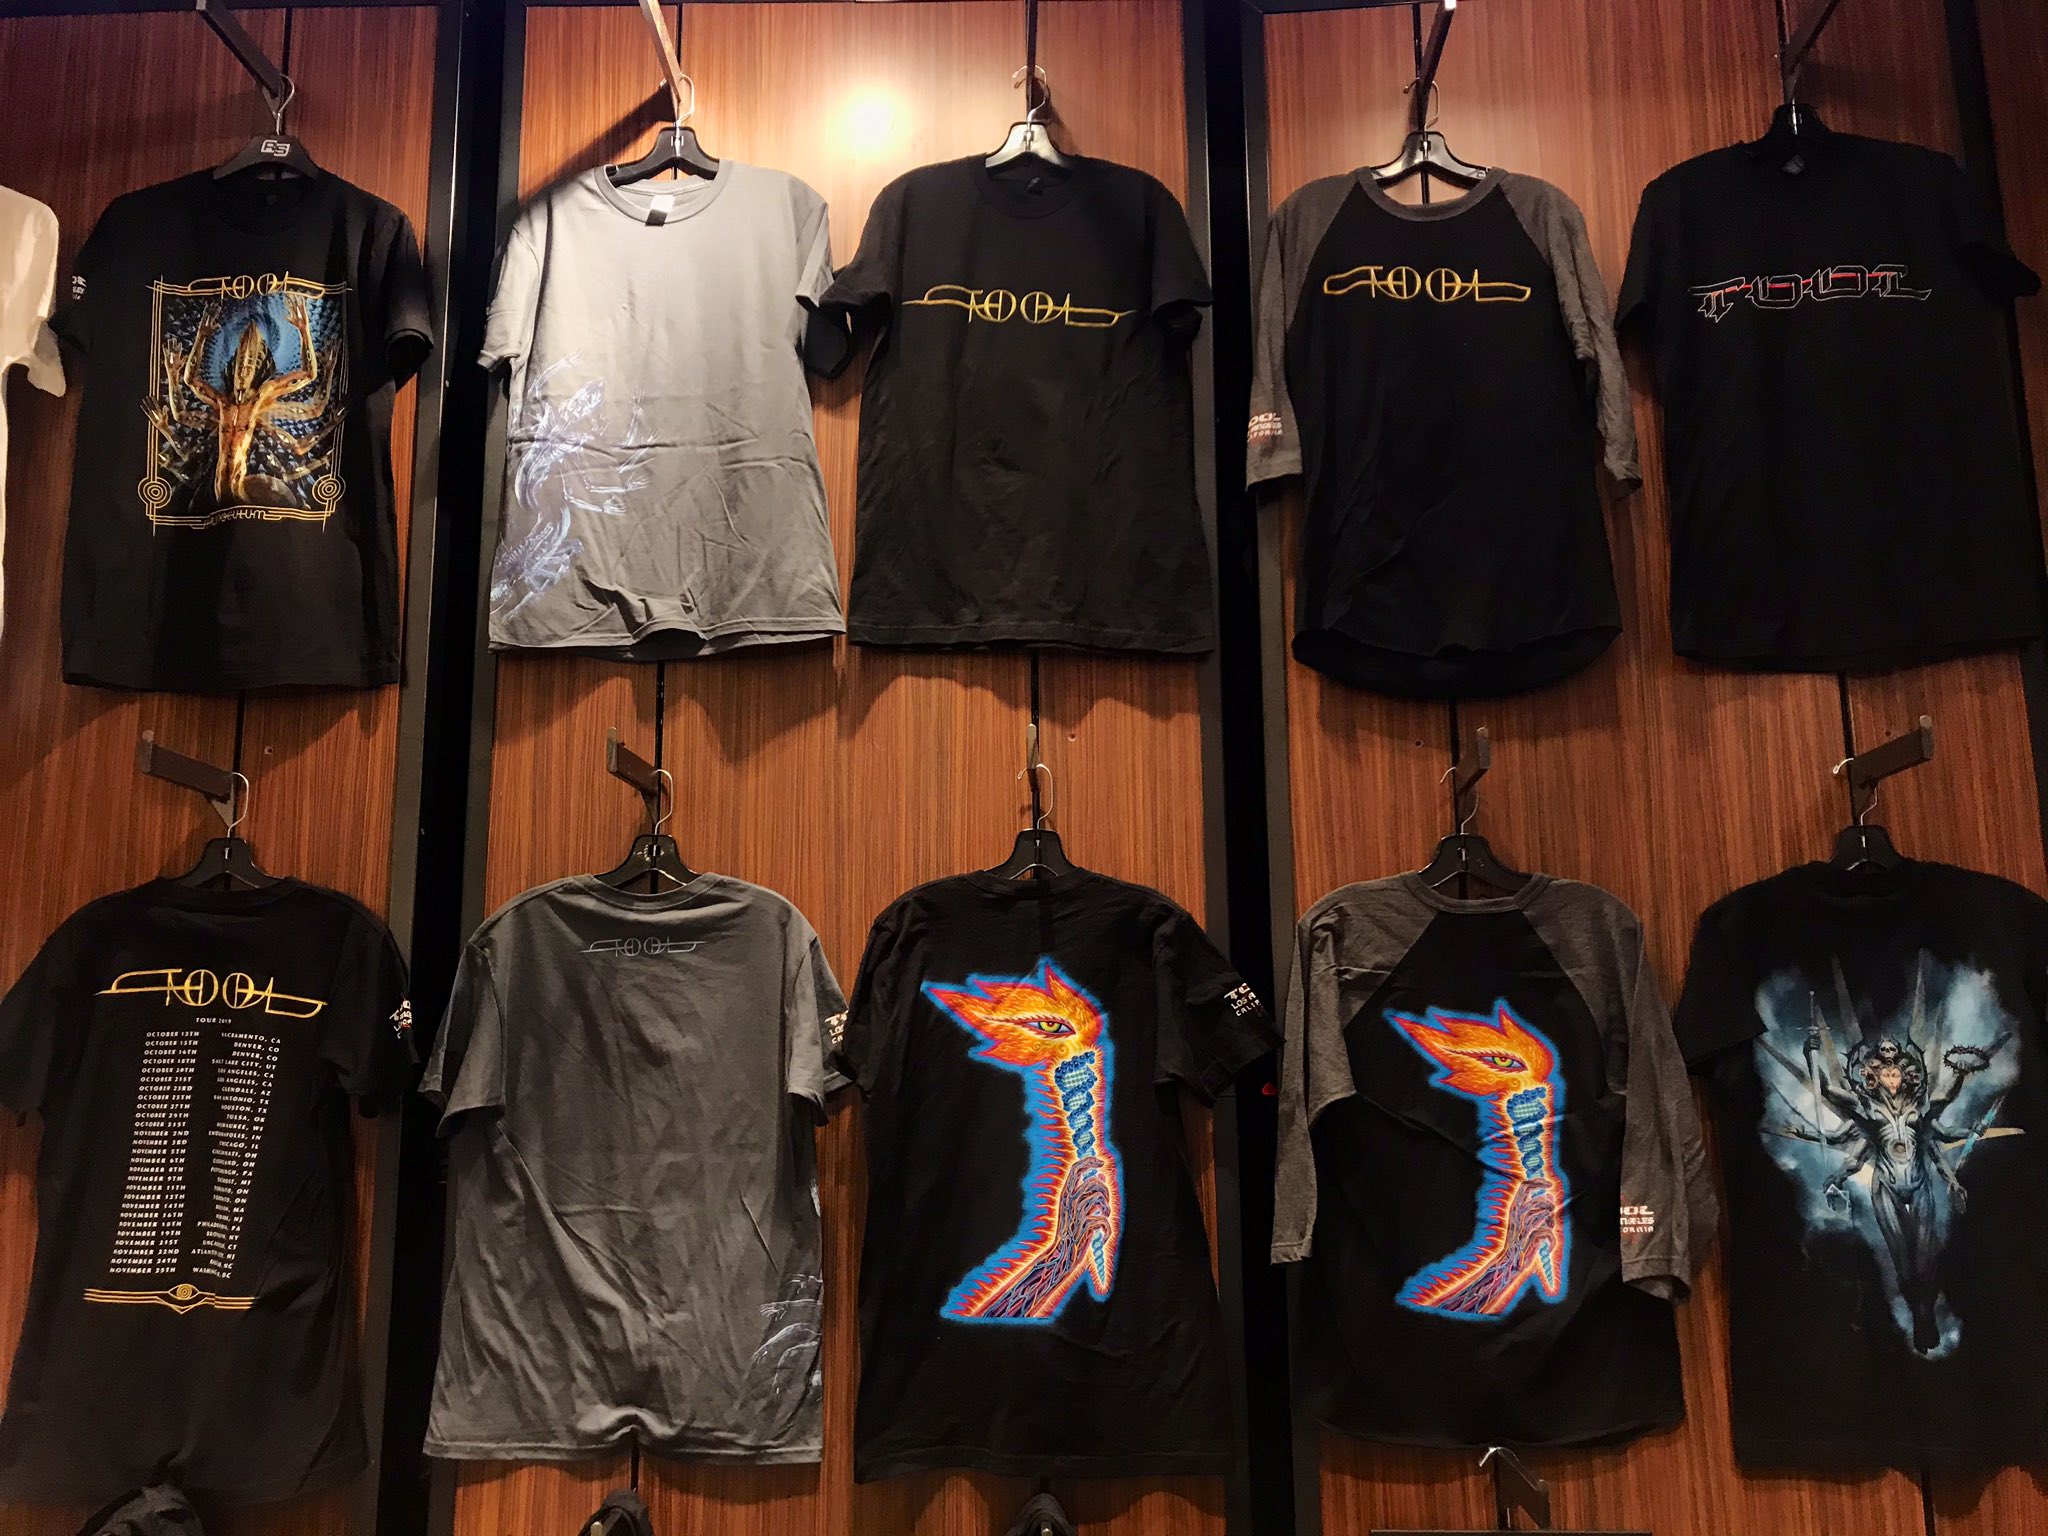 Scotiabank Arena on X: Here's your look at @Tool merch for